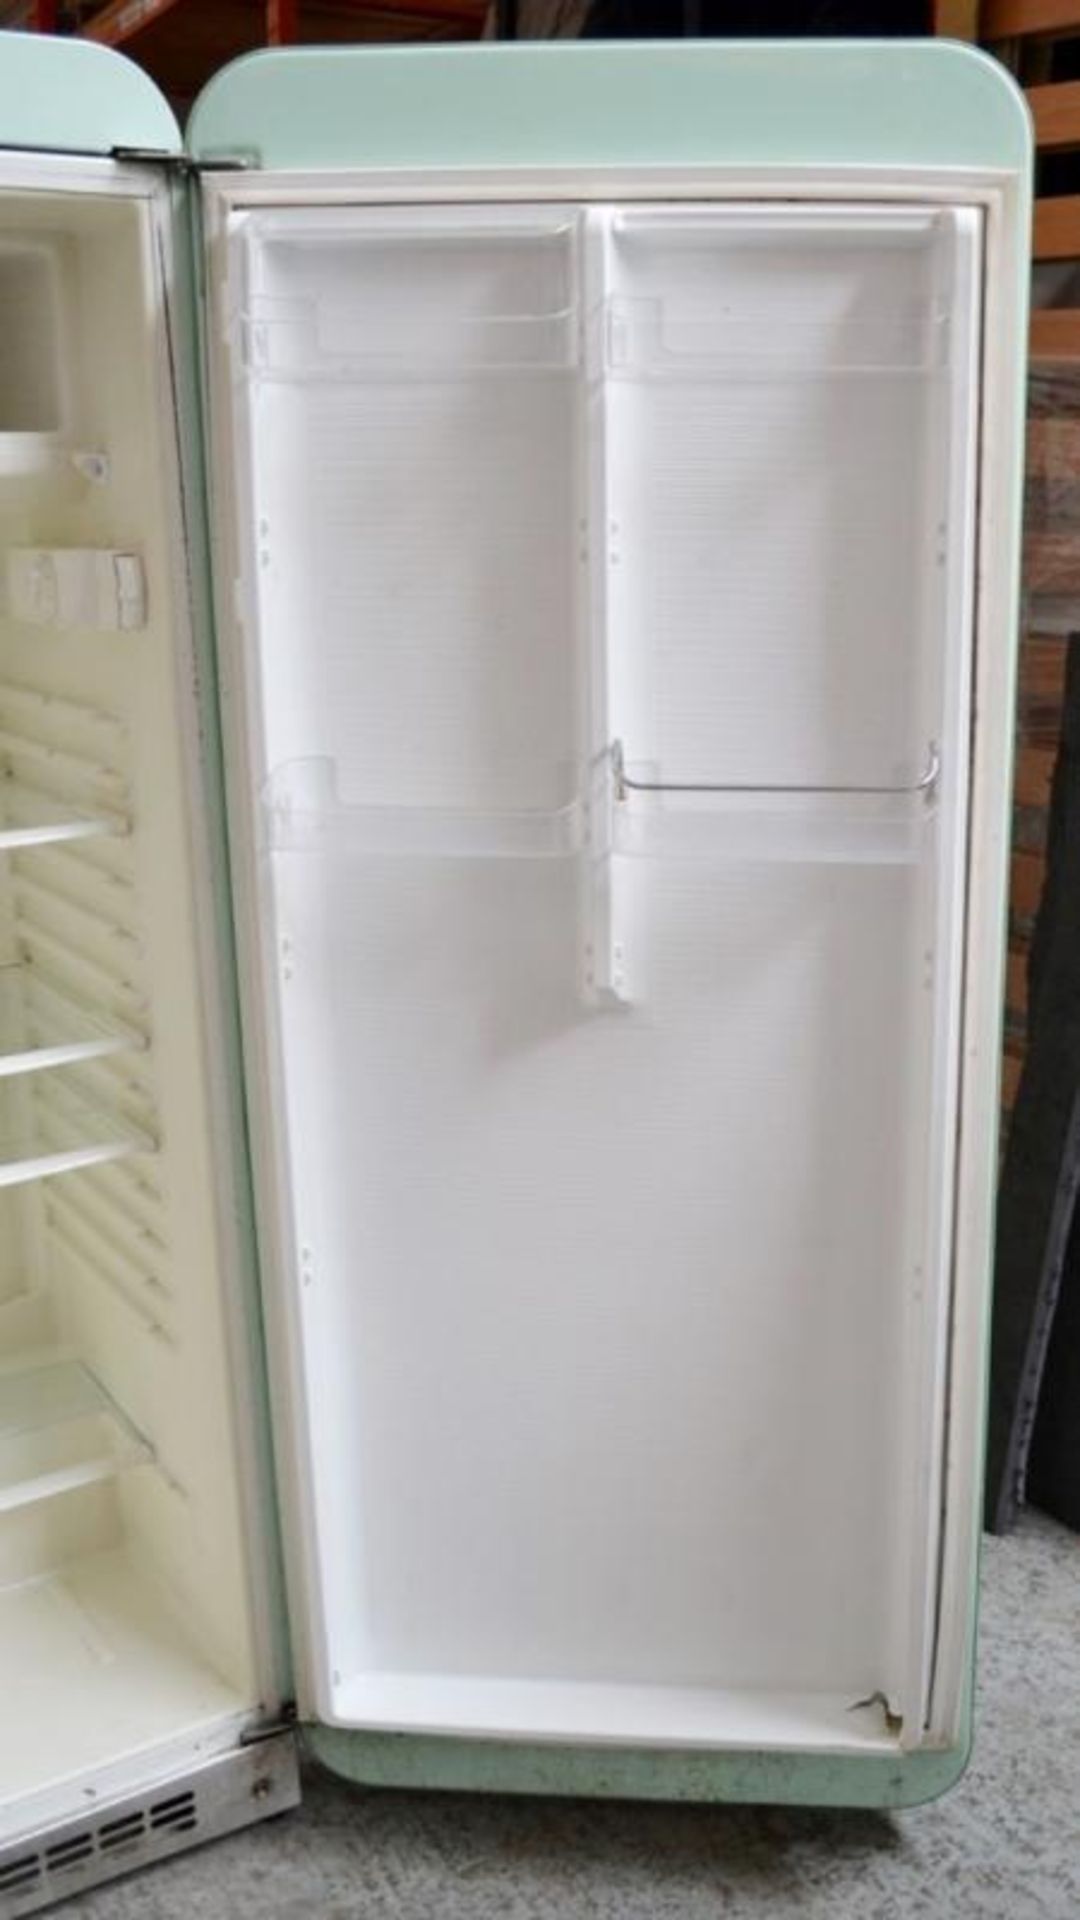 1 x Smeg Retro 50s-style Refrigerator In Classic Mint Green (Model: S28STRP/1) - Dimensions: W60 x D - Image 7 of 13